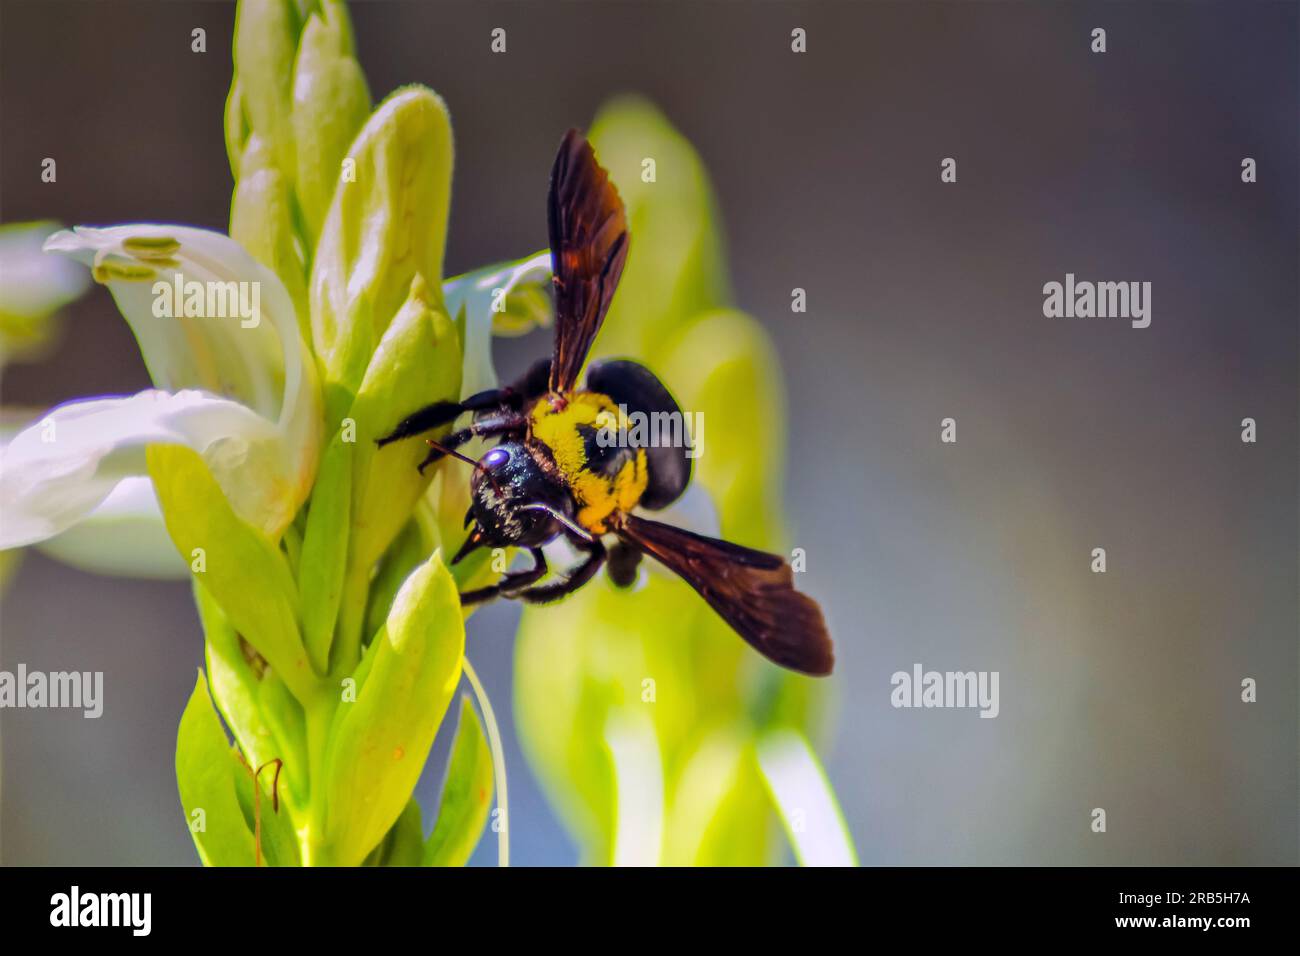 Xylocopa Latipes: Capturing the Elegance of Carpenter Bees in Macro Photography Stock Photo